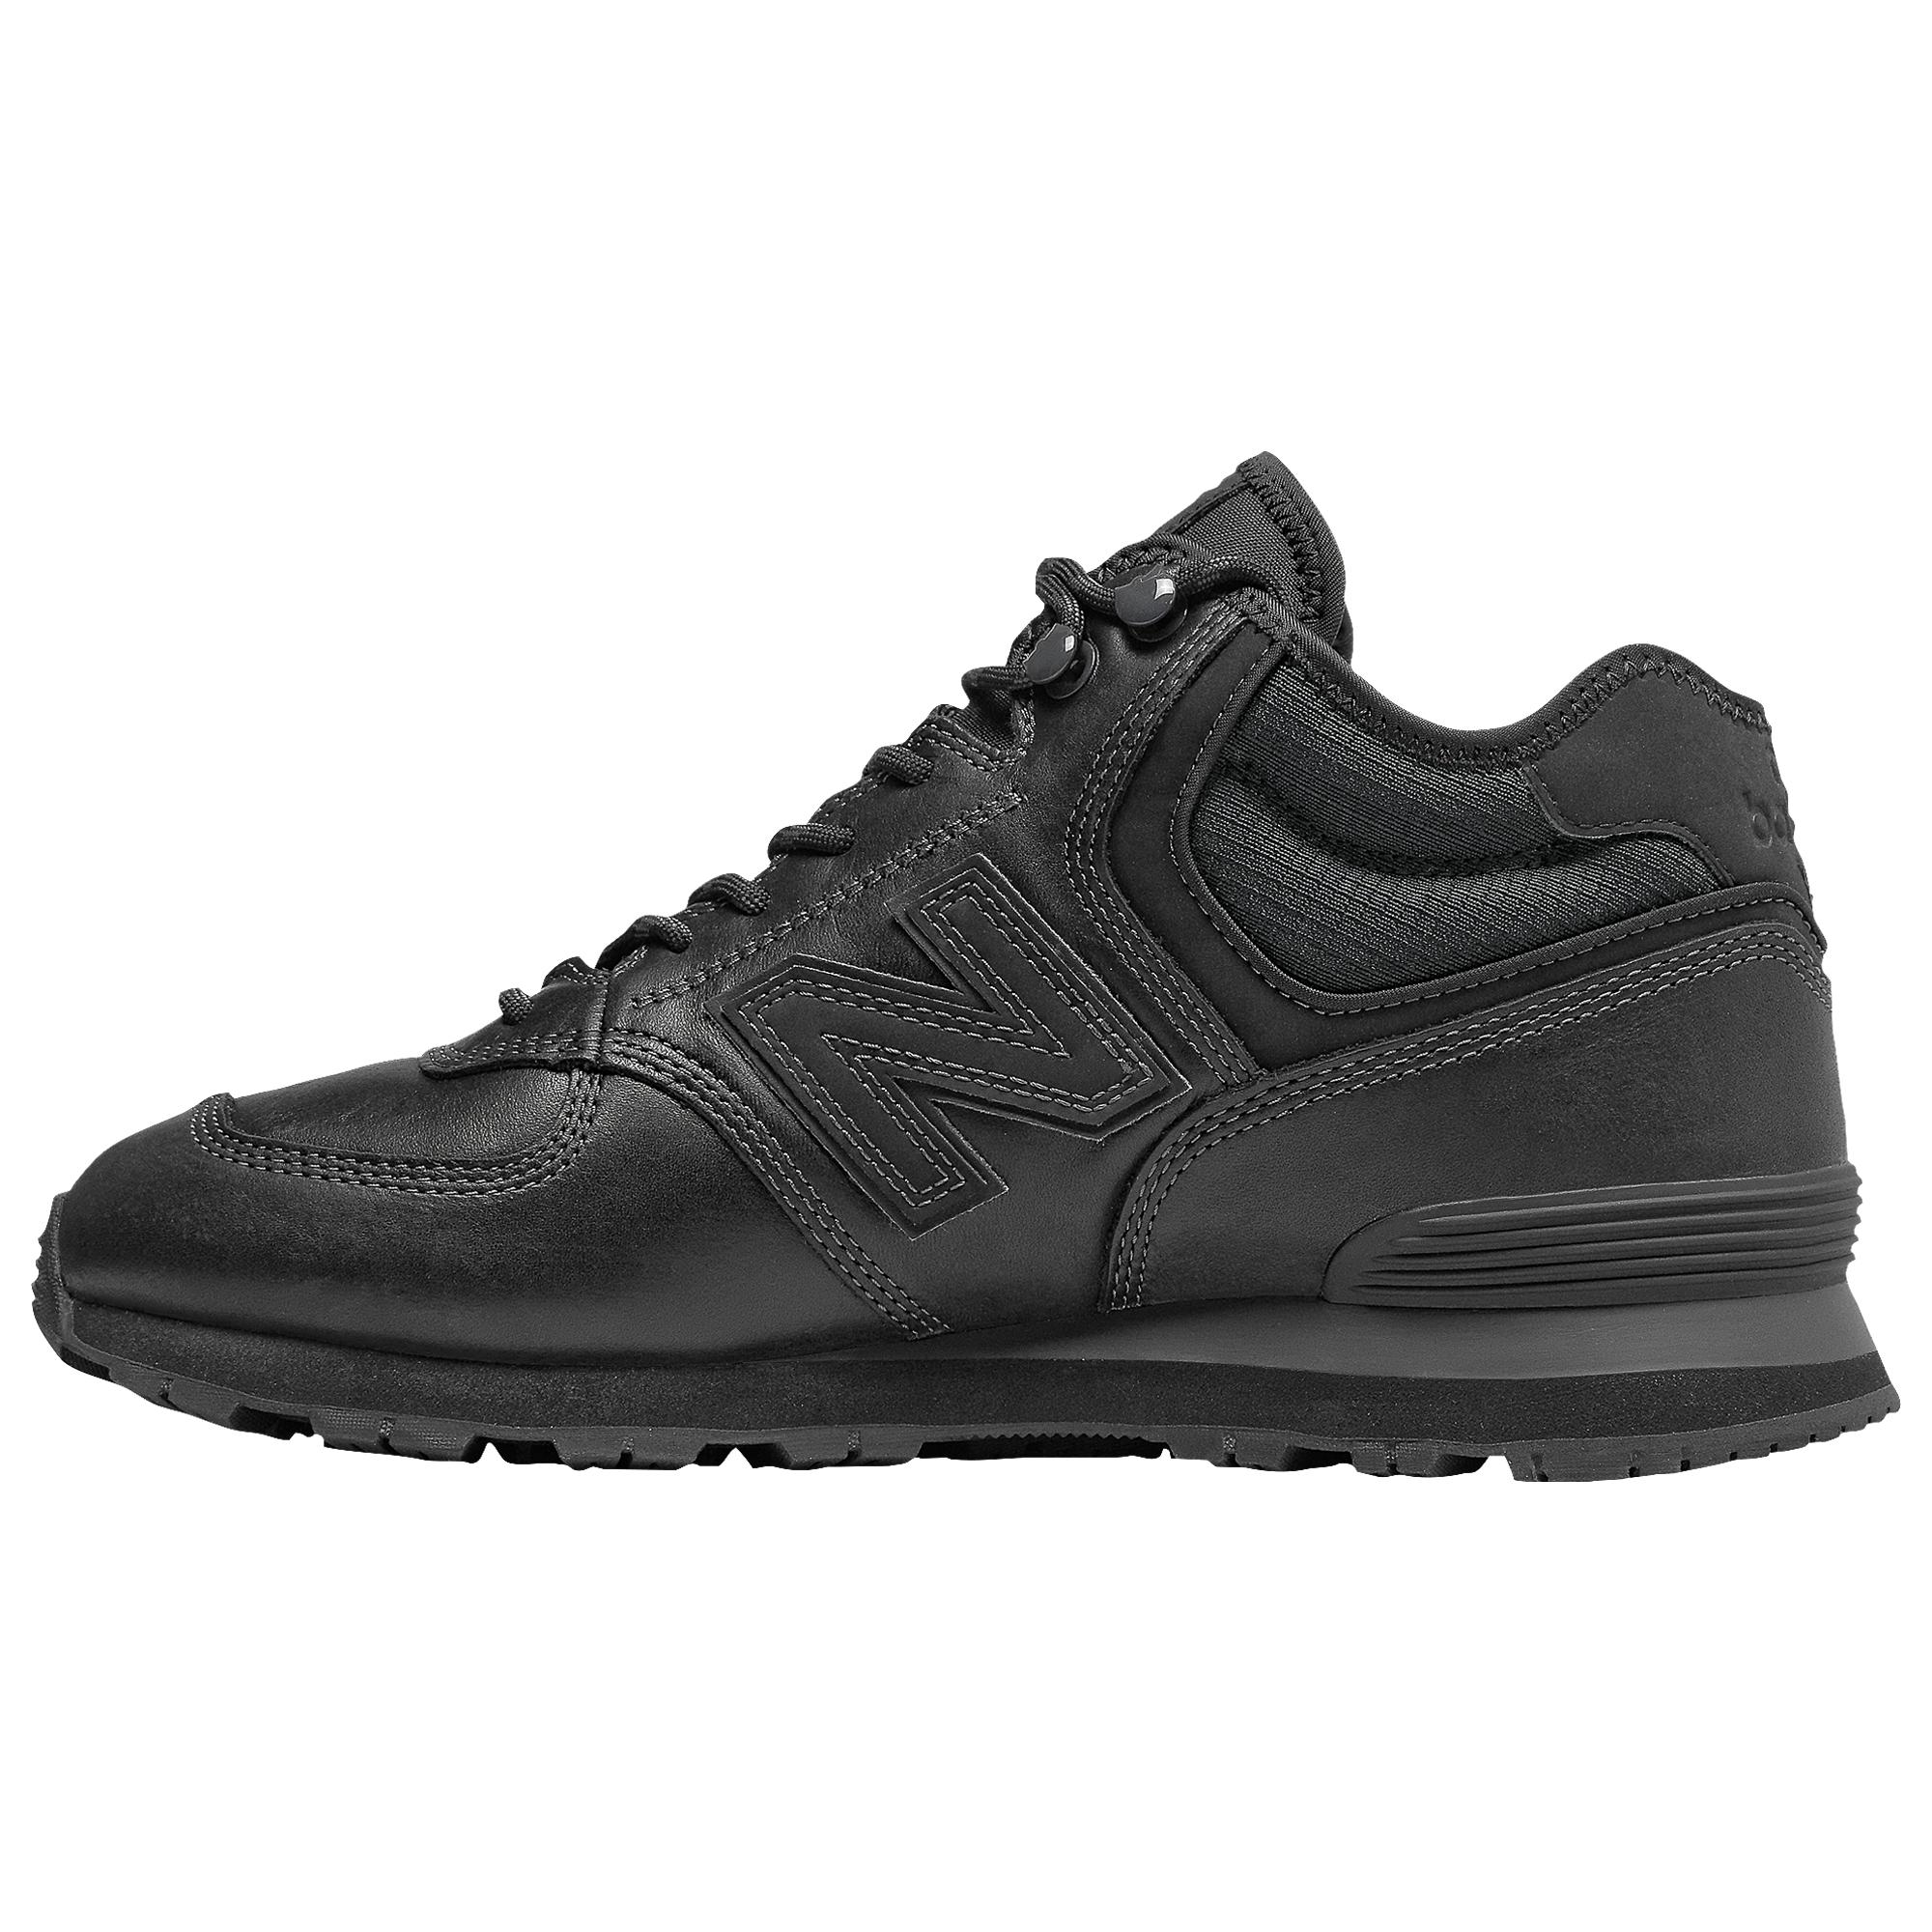 New Balance Leather 574 Mid-cut Running Shoes in Black for Men - Lyst